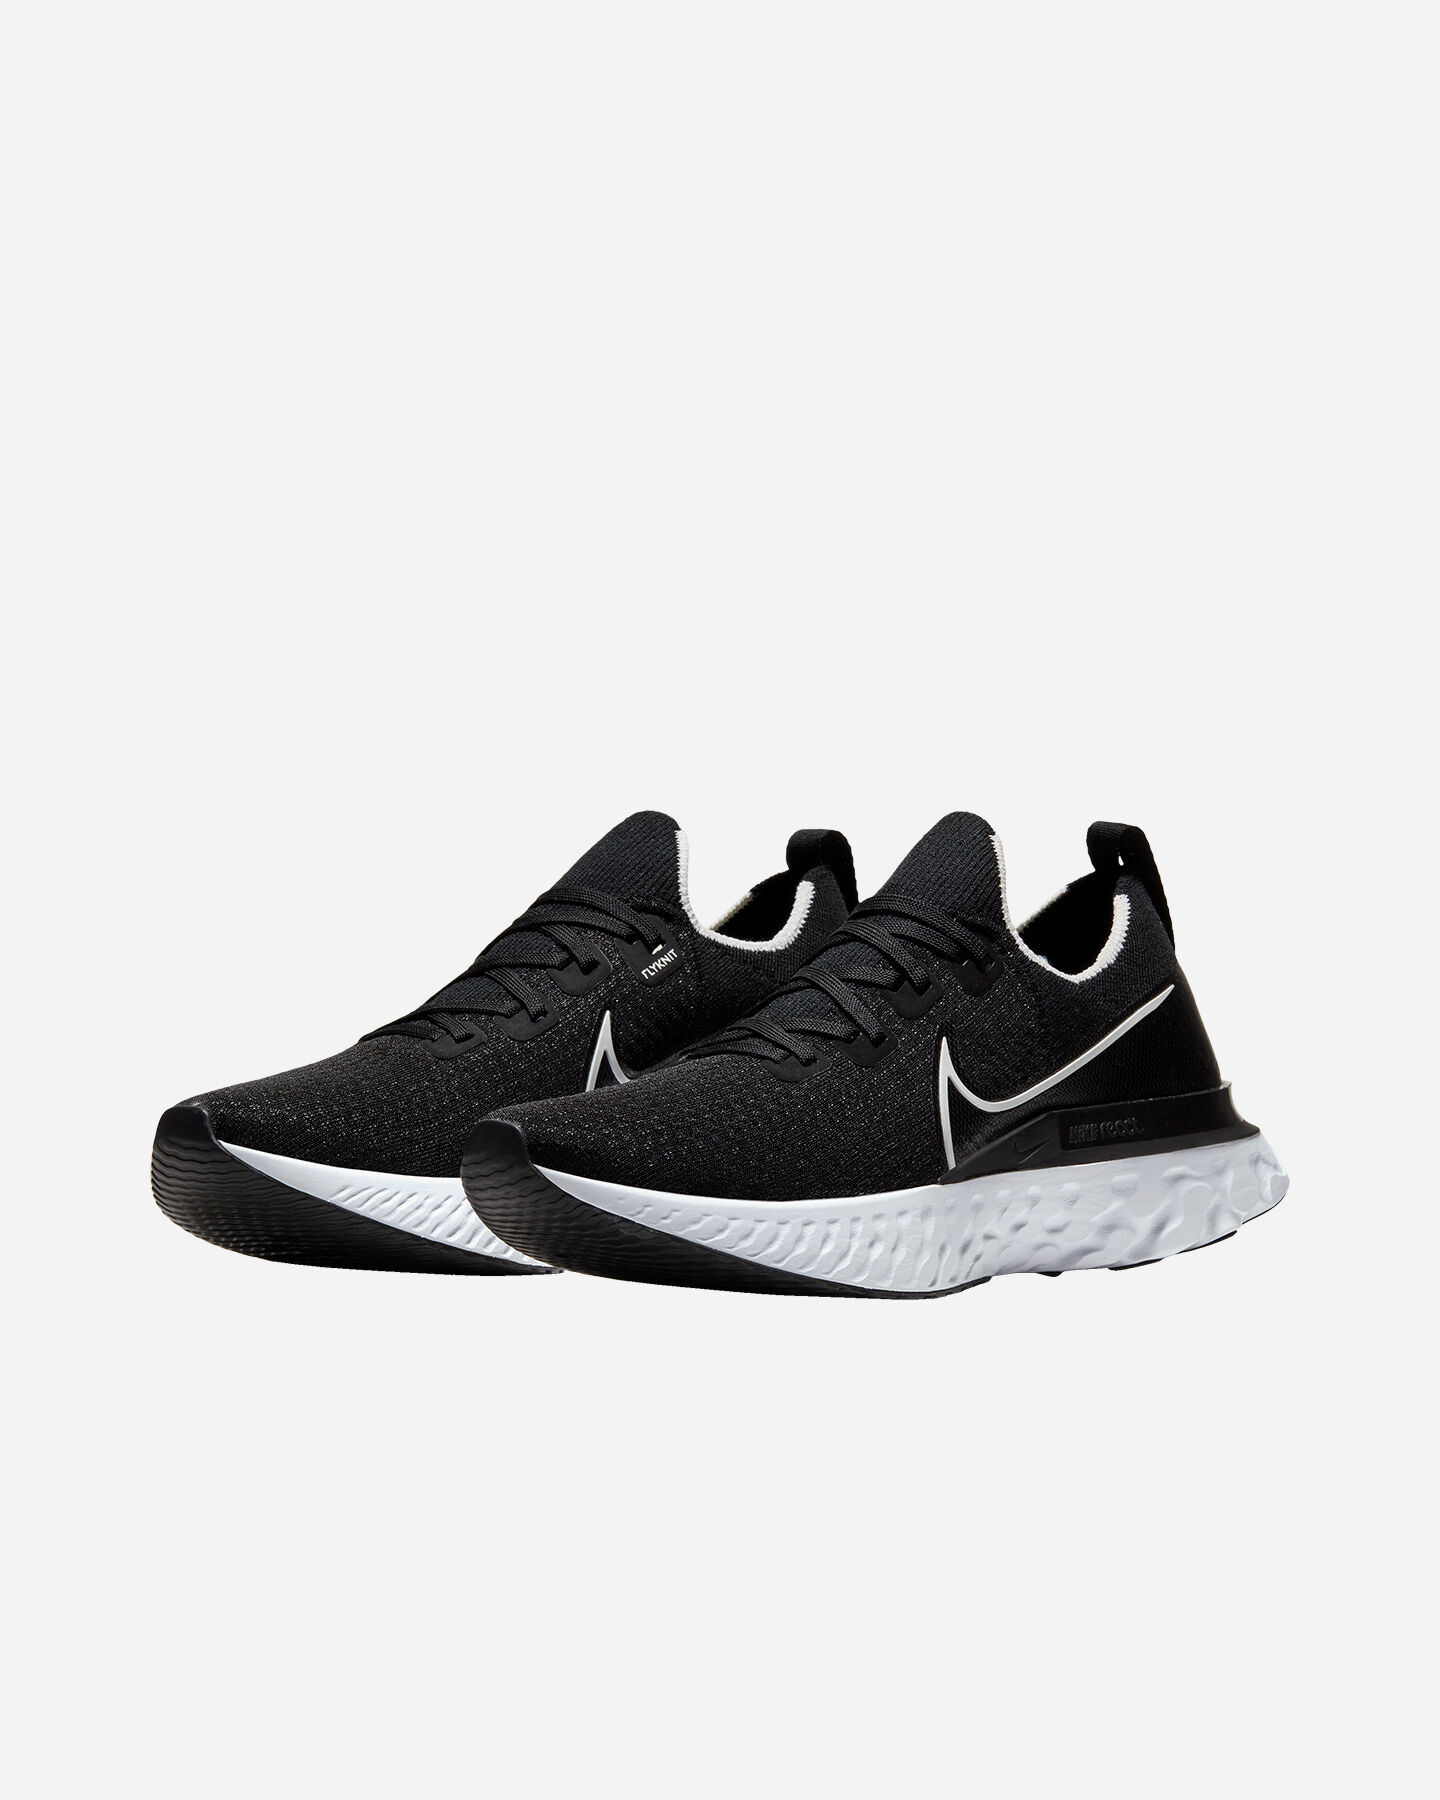  Scarpe running NIKE EPIC PRO REACT FLYKNIT M S5162015|002|6 scatto 1